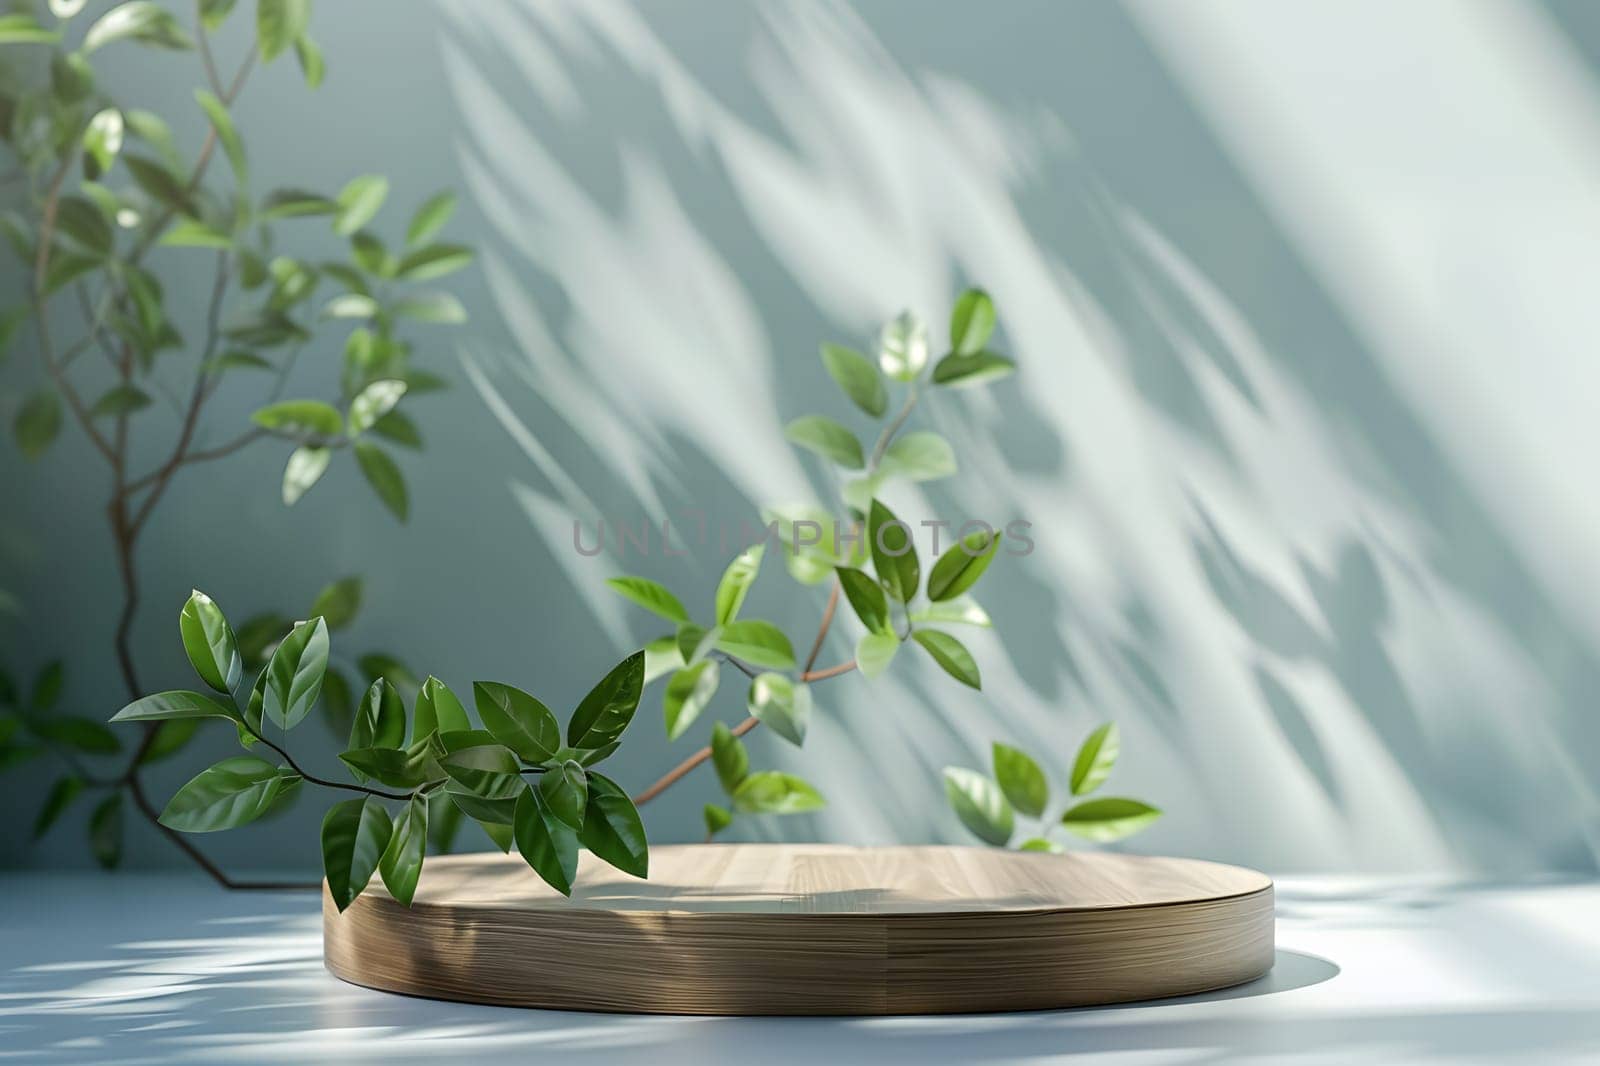 A rectangular wooden podium adorned with green leaves from houseplants sits in front of a vibrant green wall, creating a serene and natural landscape